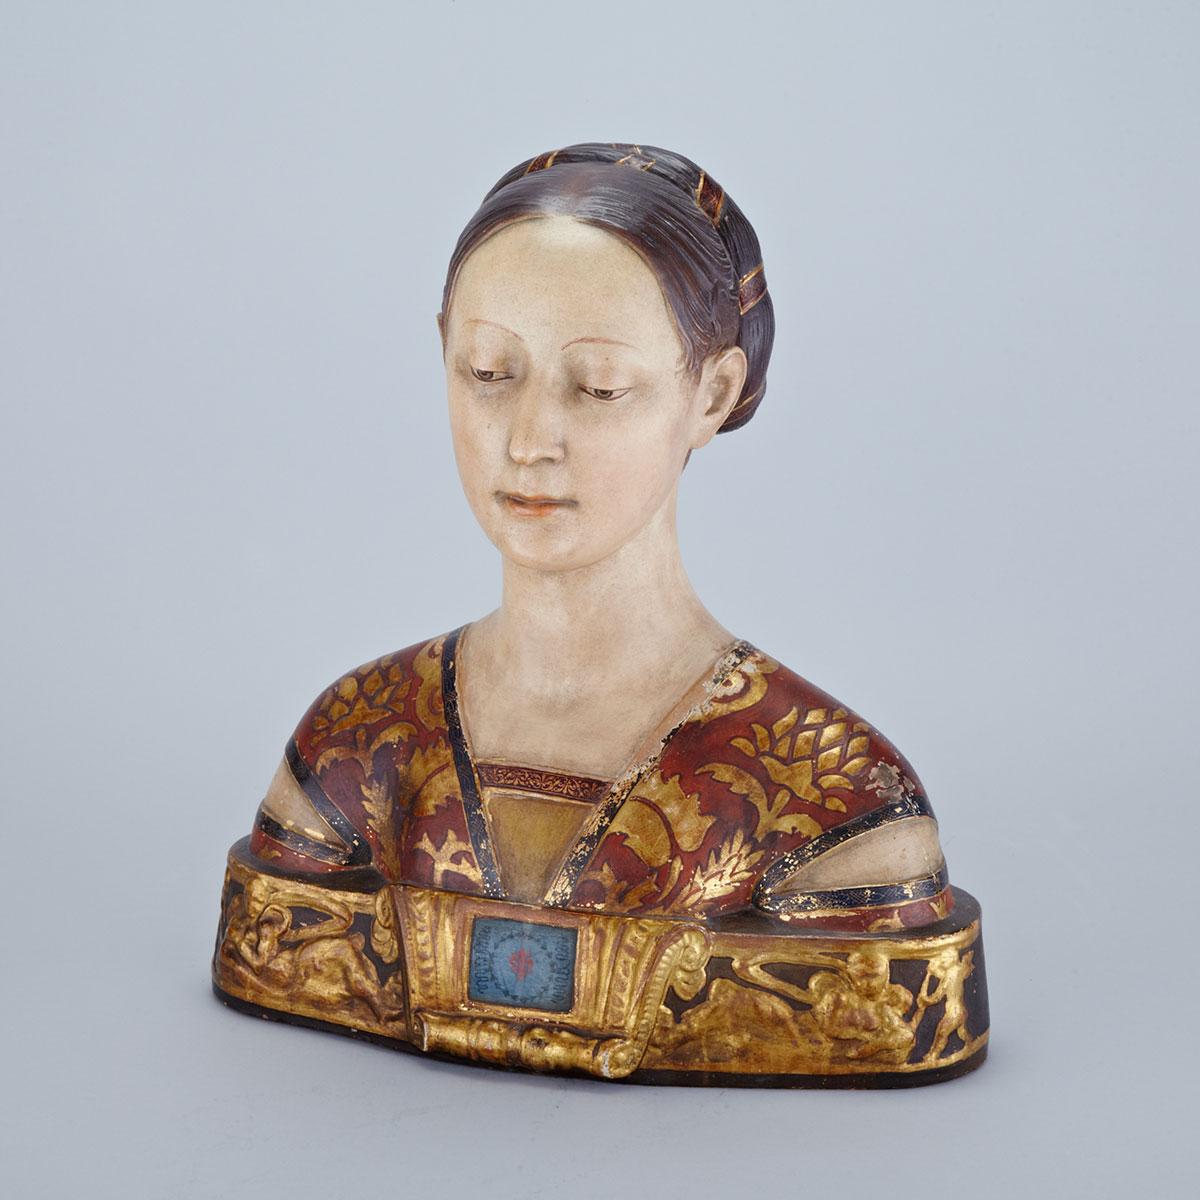 Italian Polychromed and Parcel Gilt Terra Cotta Bust of a Young Woman, Dini & Cellai, c.1880